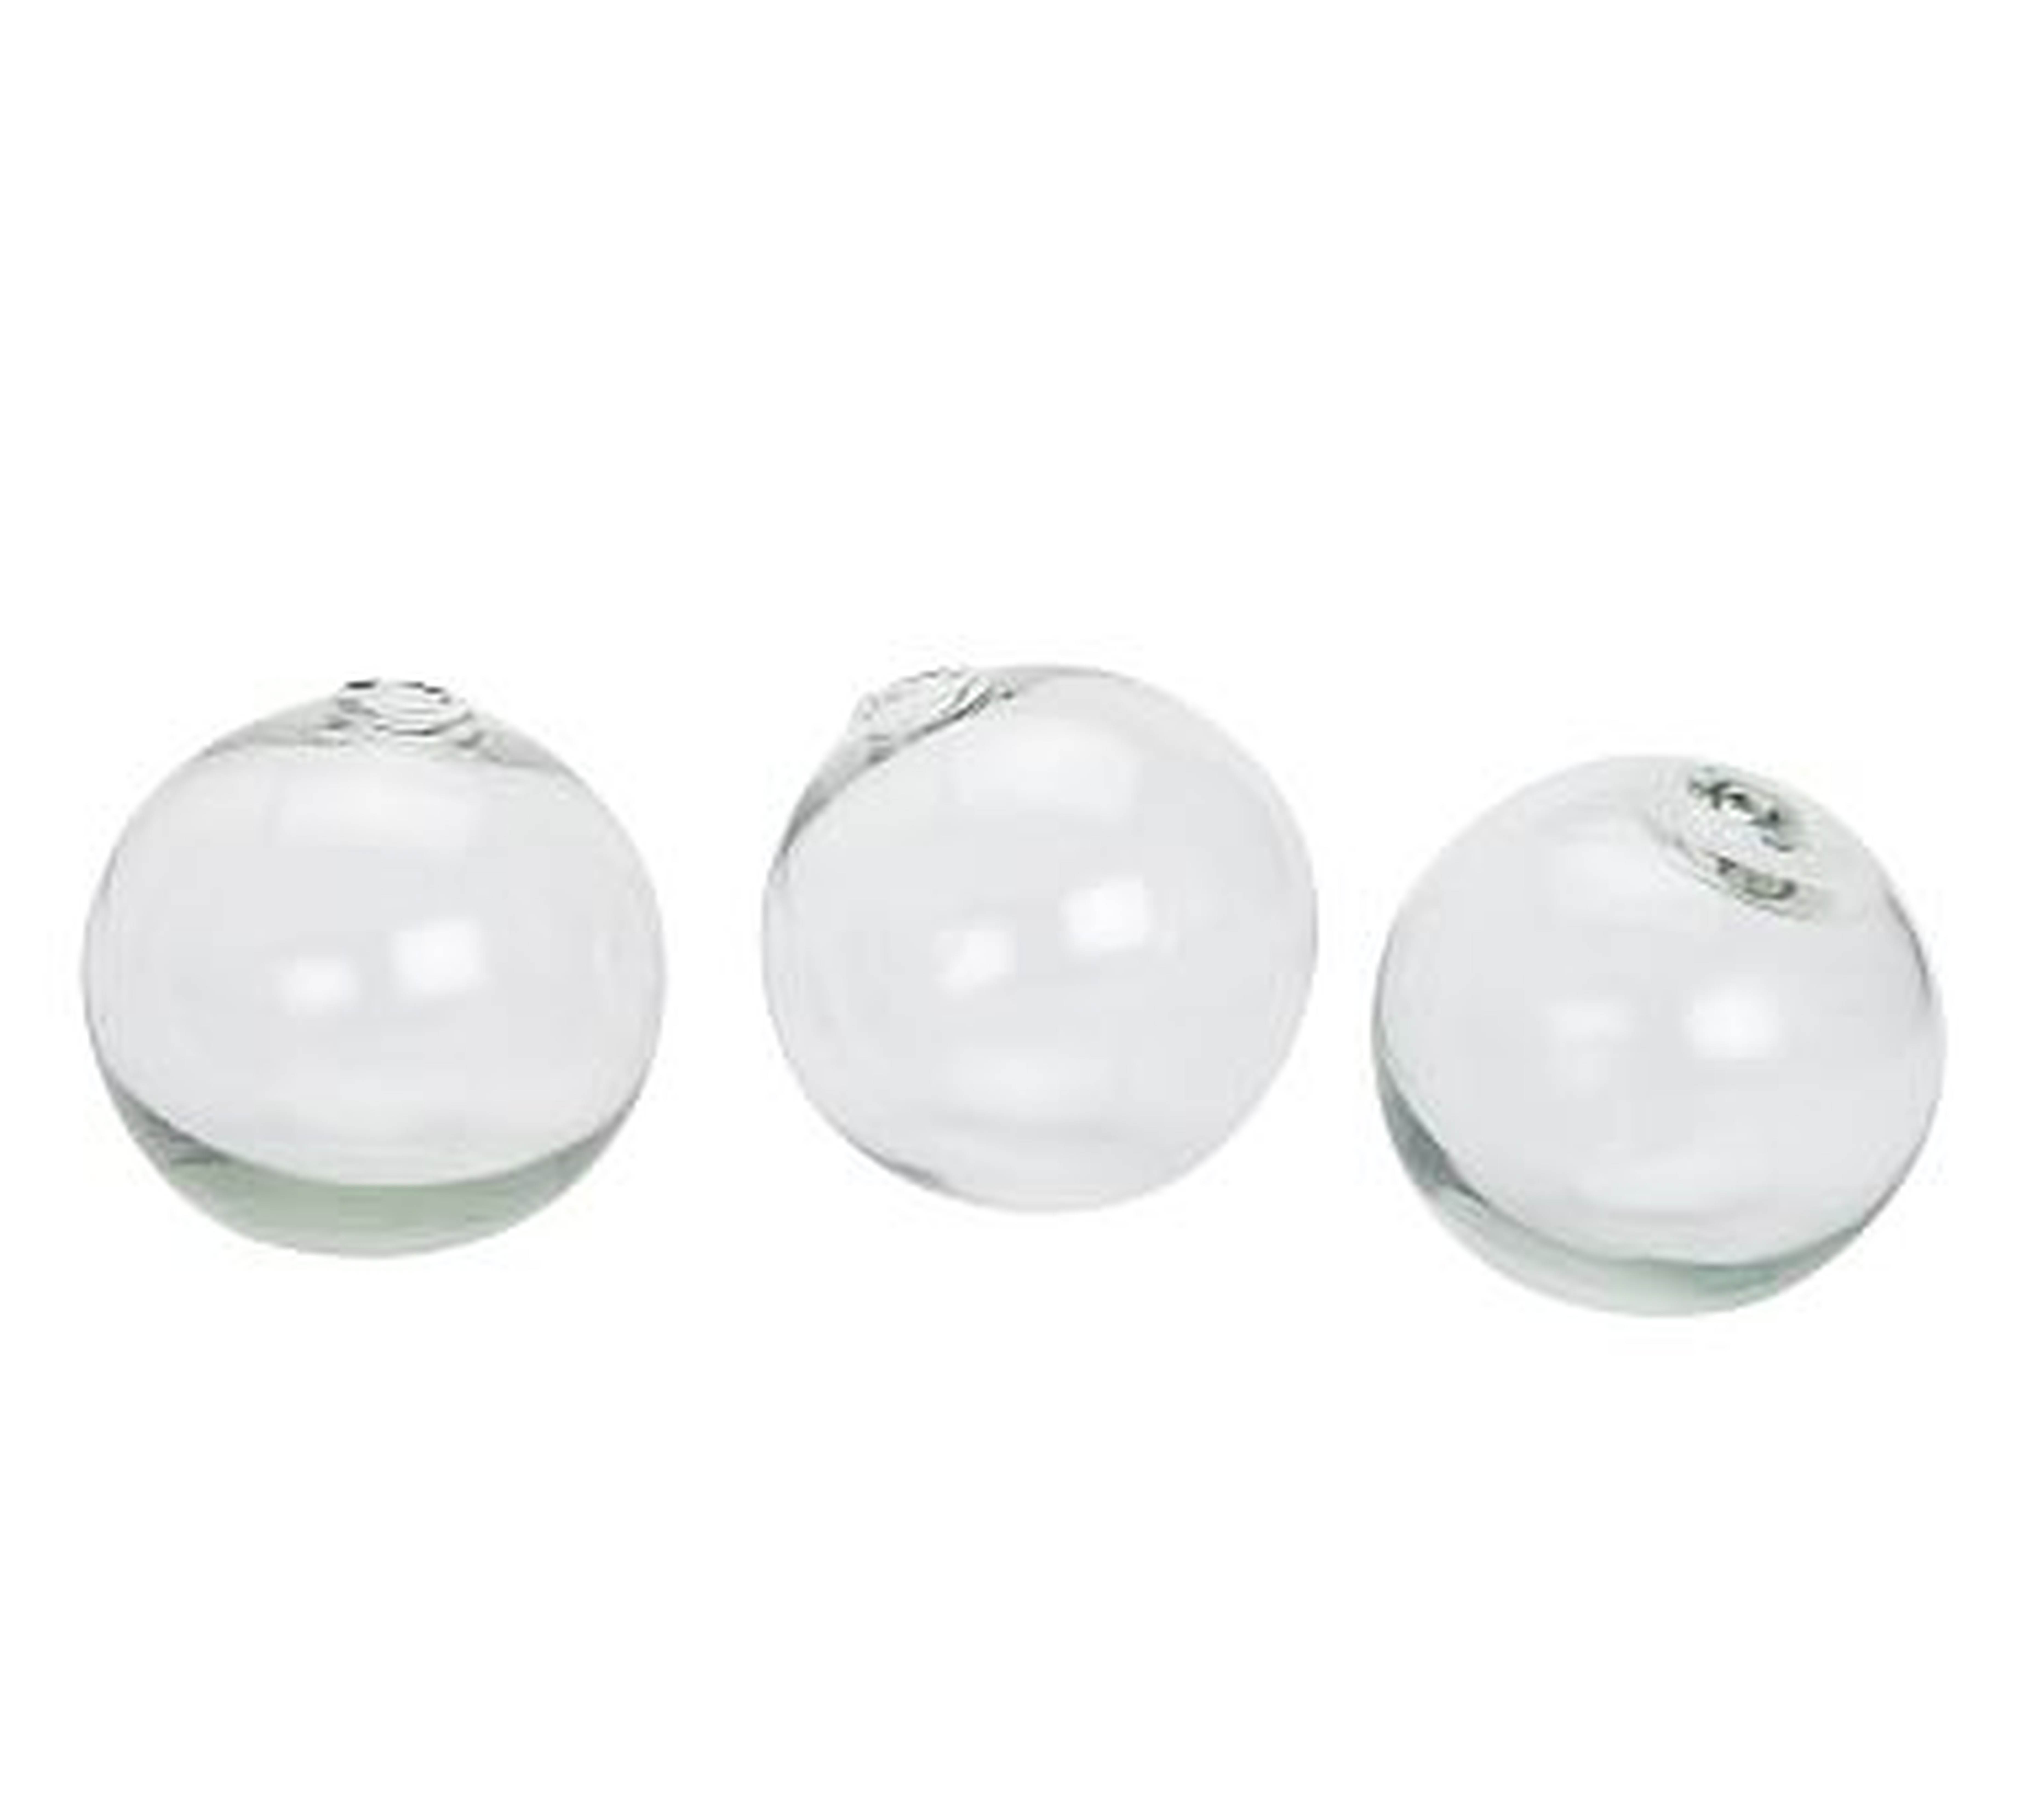 Recycled Glass Balls, Clear - Set of 3 - Pottery Barn